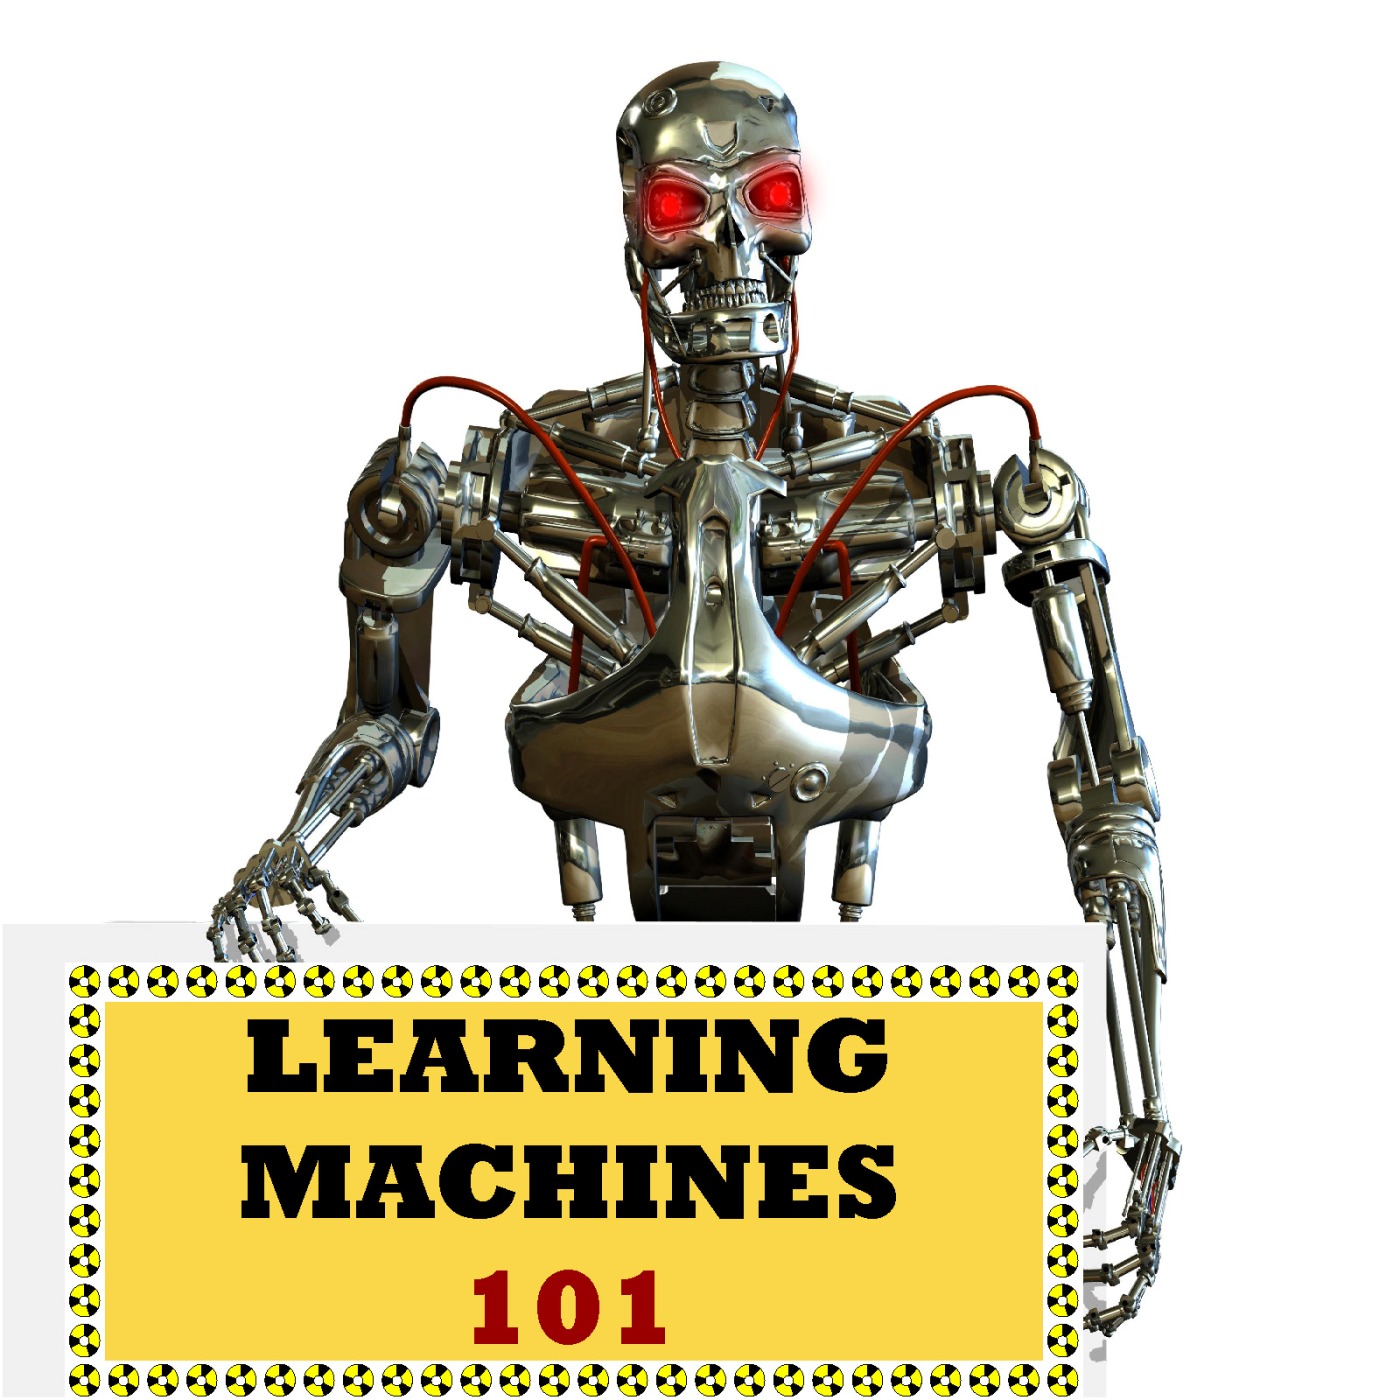 About Learning Machines 101